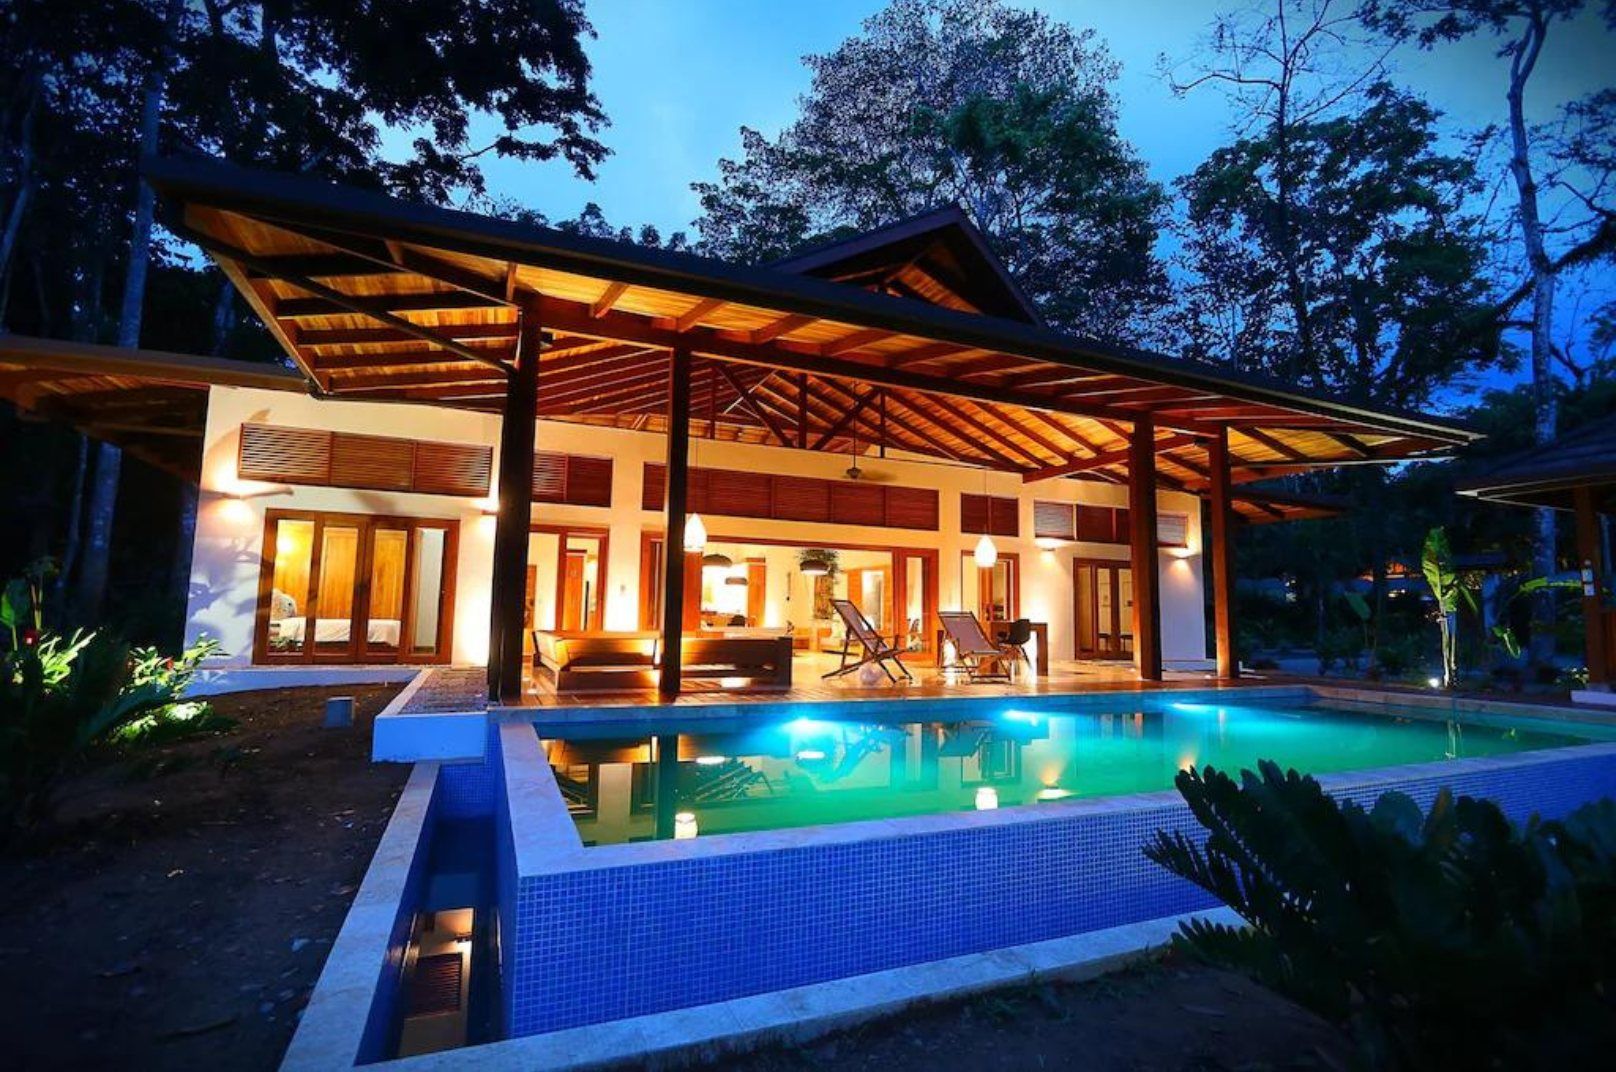 Costa Rica vacation rentals for large groups